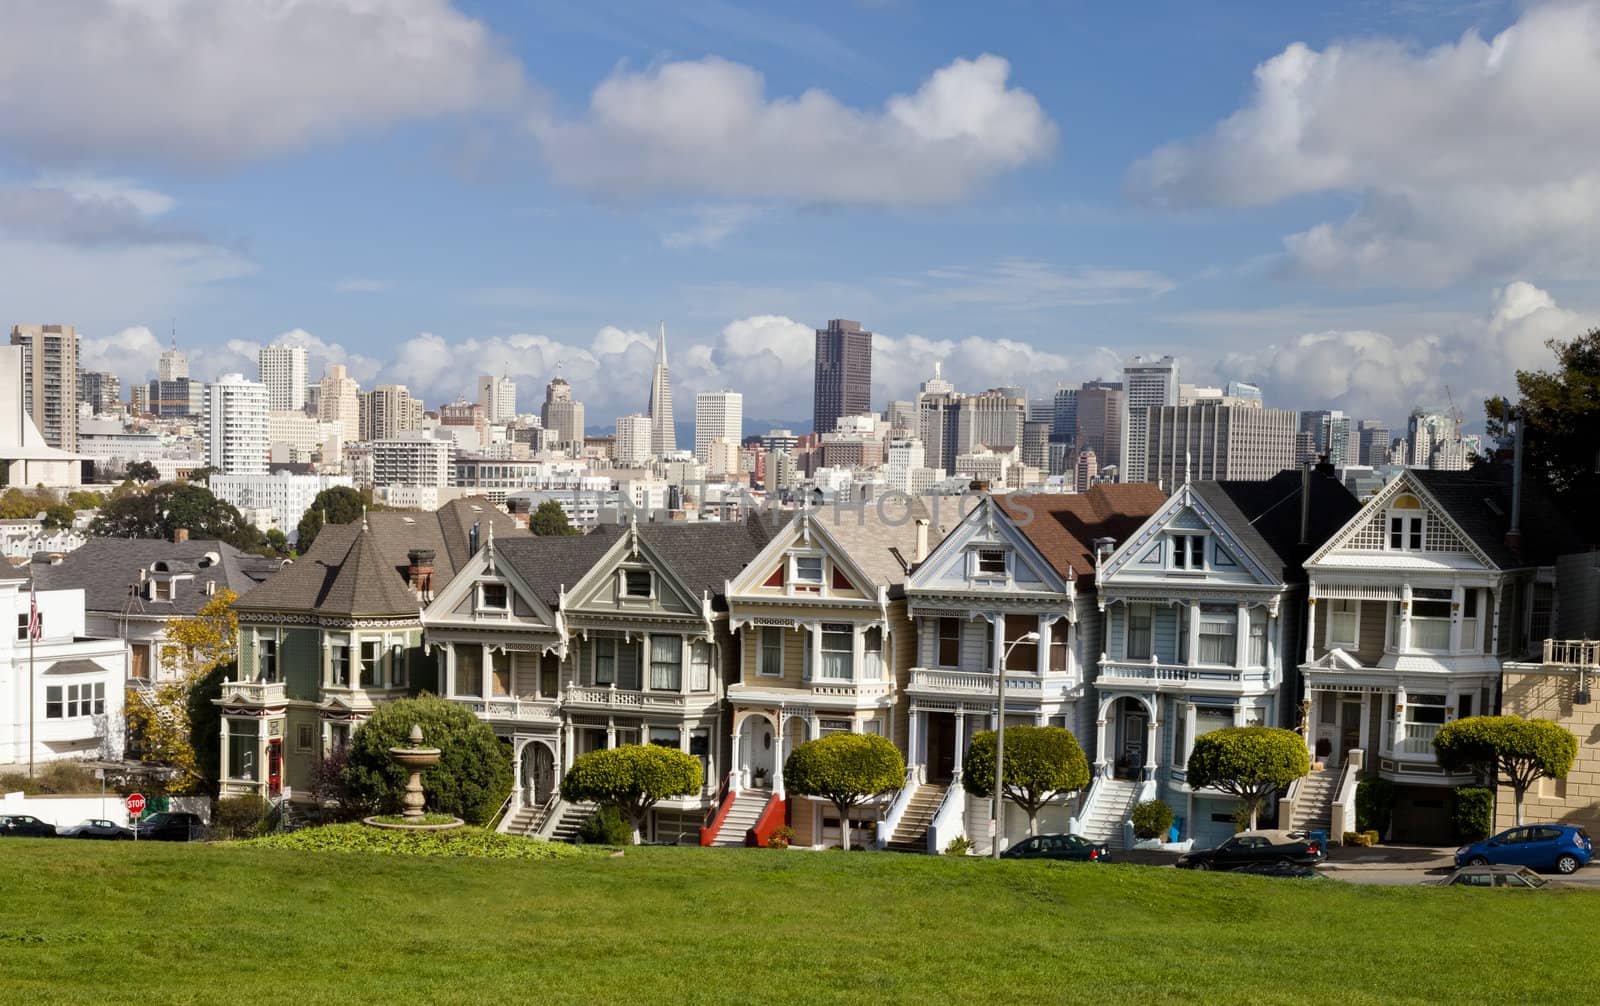 Famous Victorian row houses in San Francisco with skyline. House by hanusst